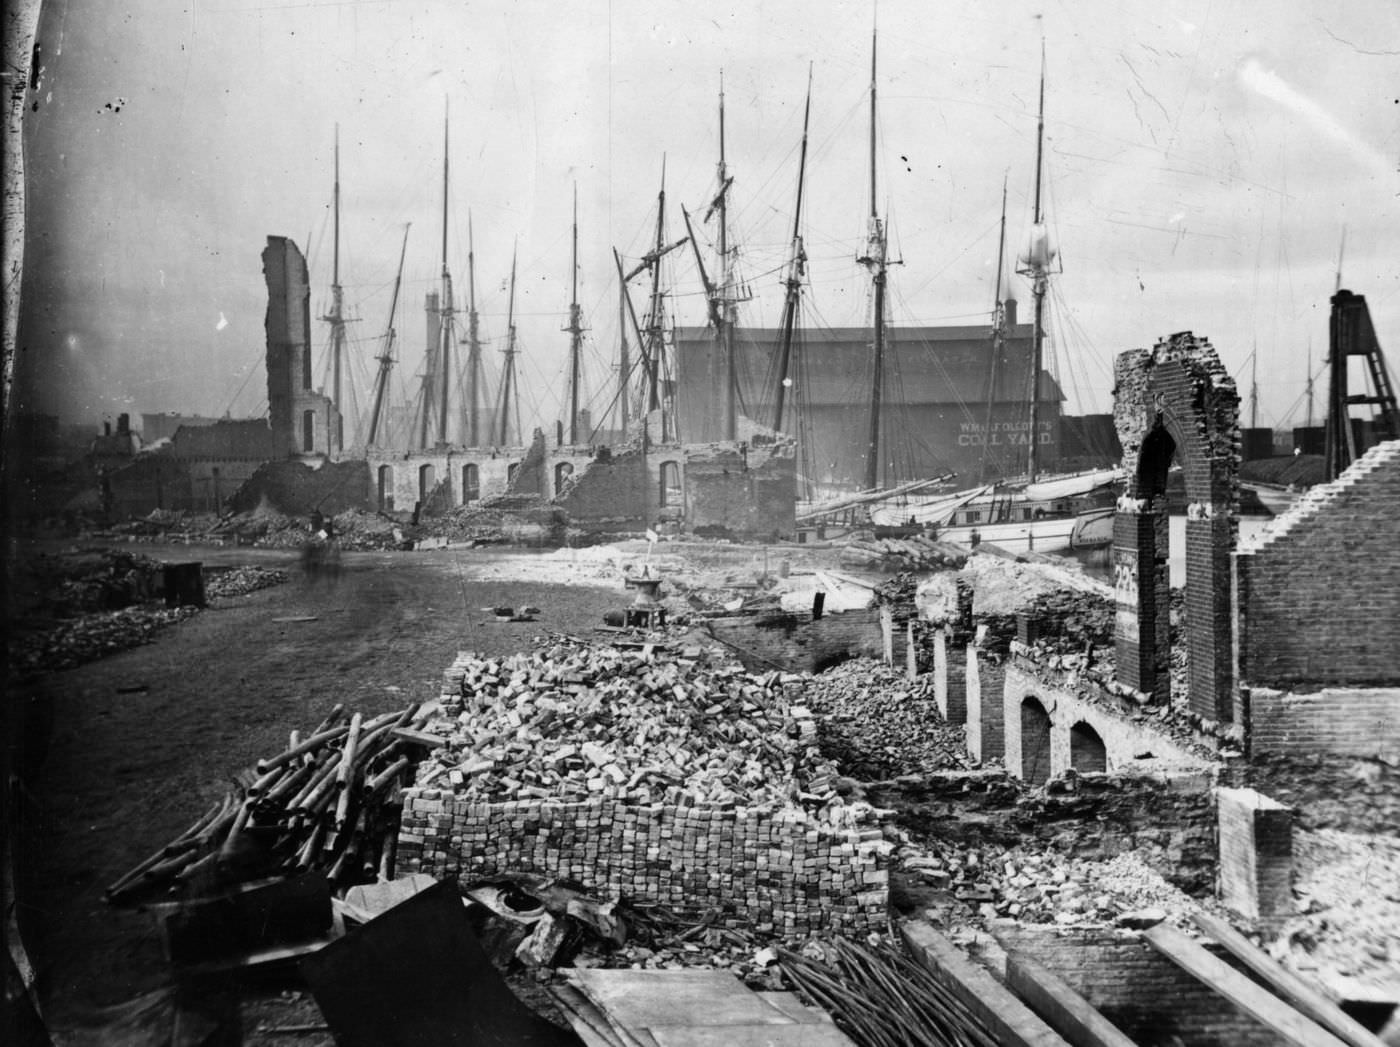 The ruins looking north across the Chicago river, toward the site of today's Merchandise Mart, after the Great Chicago Fire in 1871.